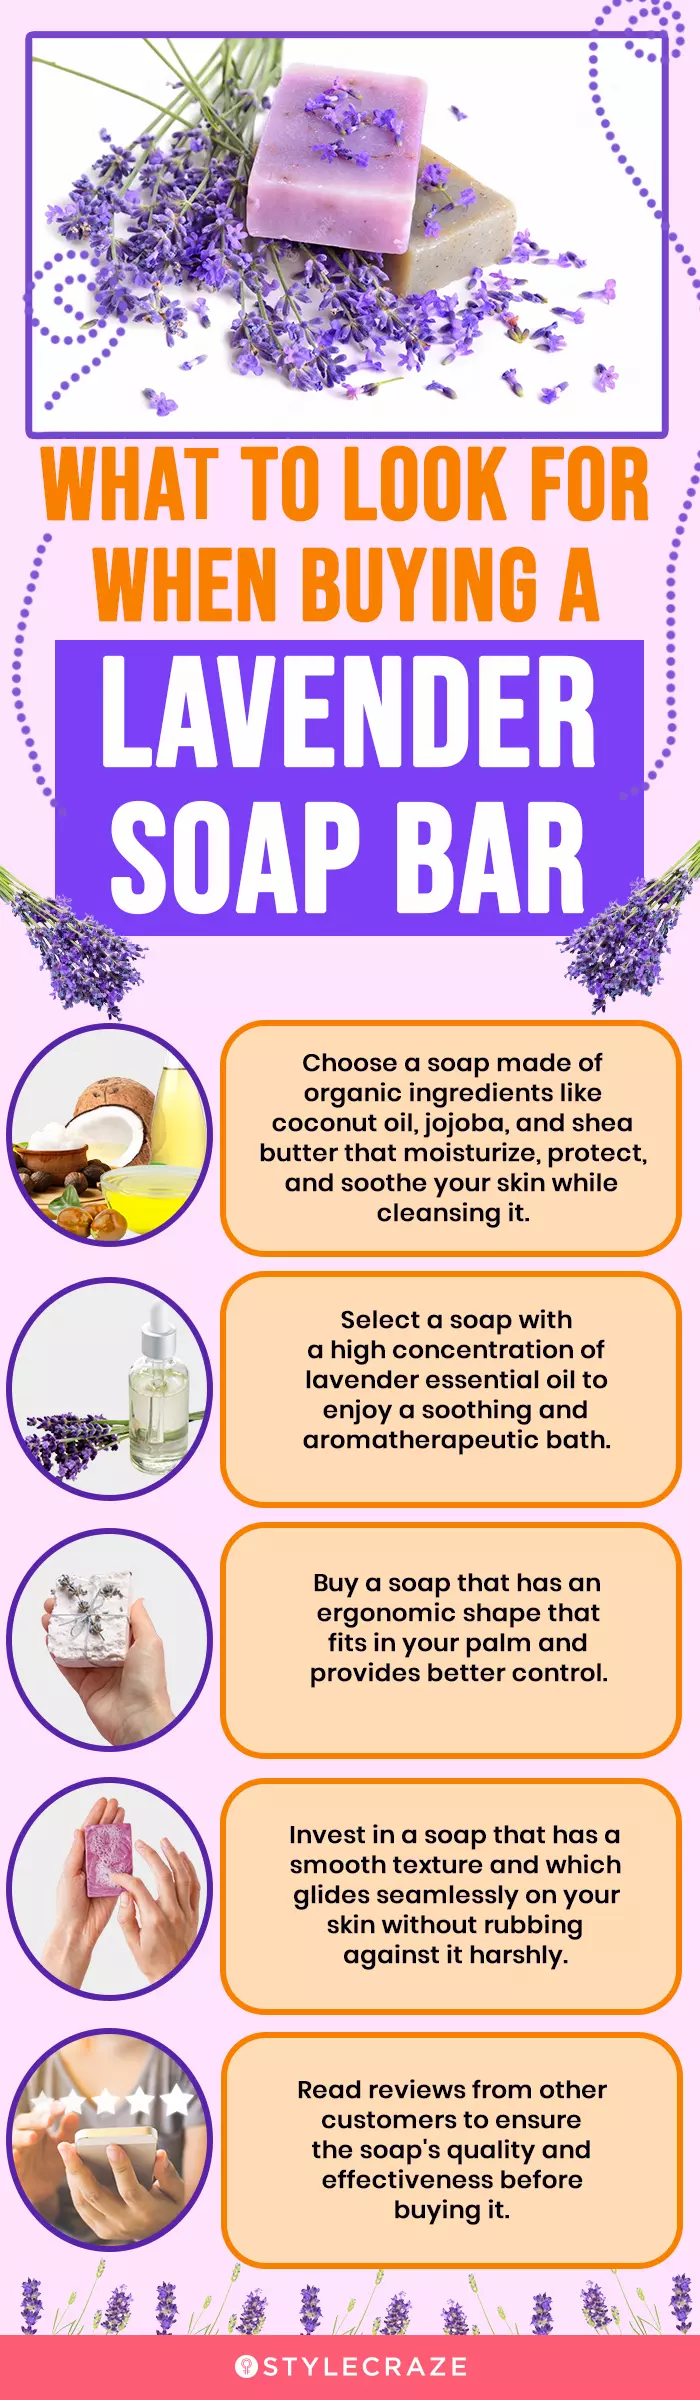 What To Look For When Buying A Lavender Soap Bar (infographic)